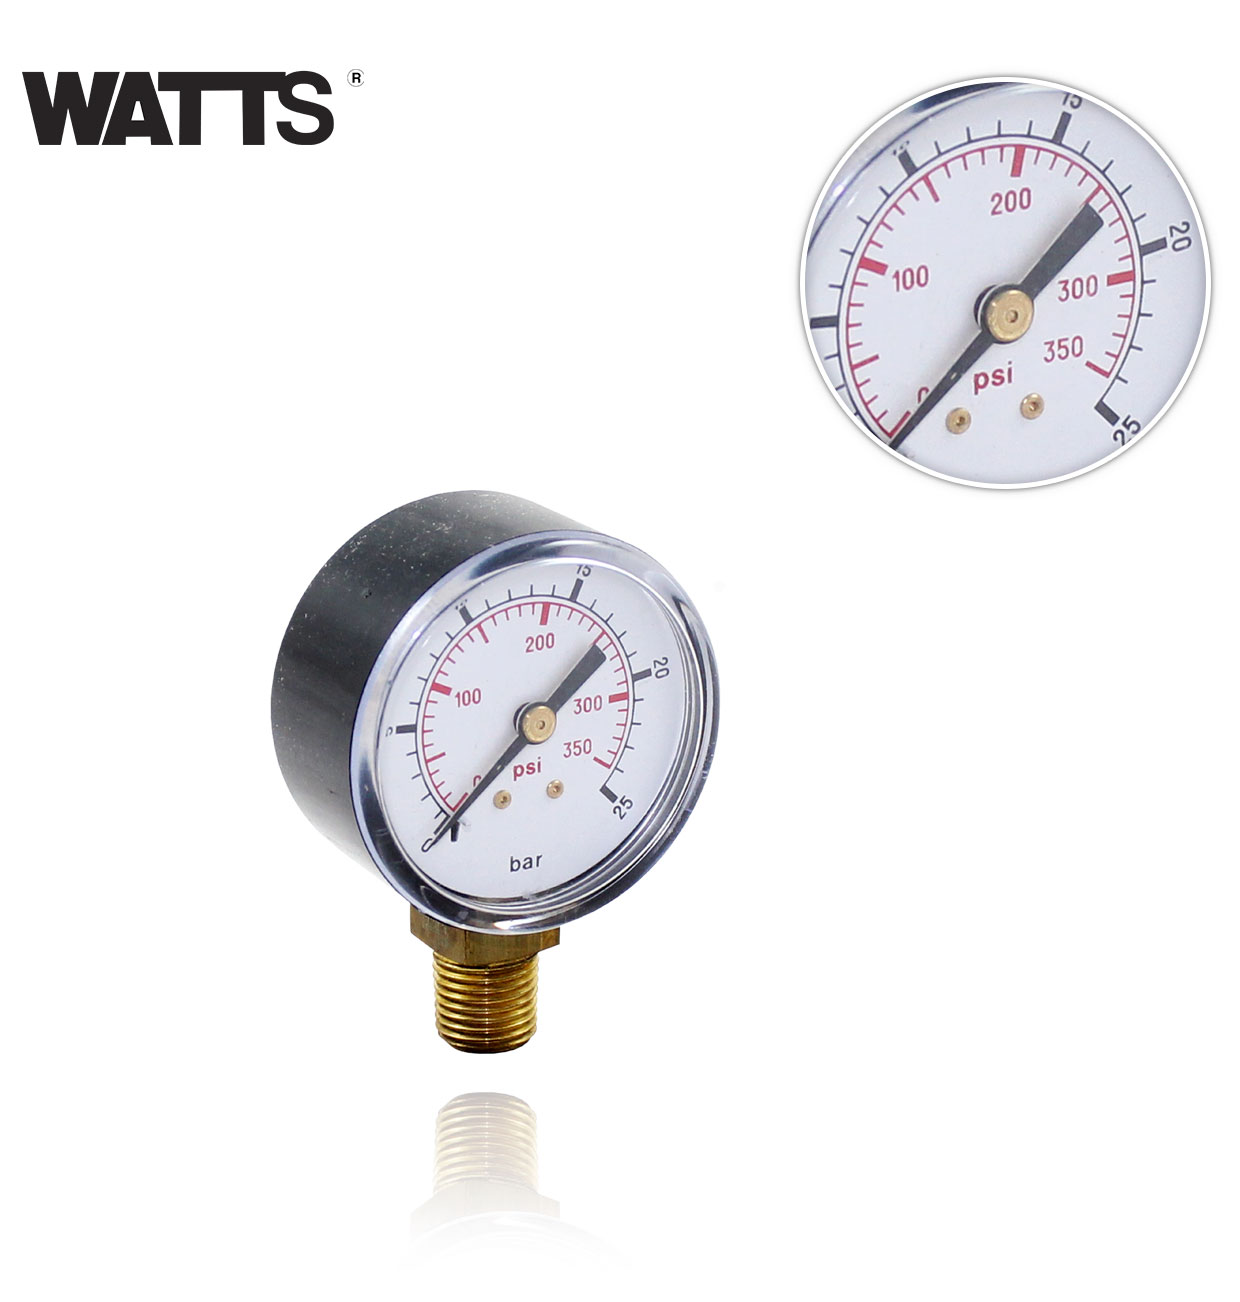 D50 0/25bar R1/4G CONICAL RADIAL MANOMETER WITH ABS